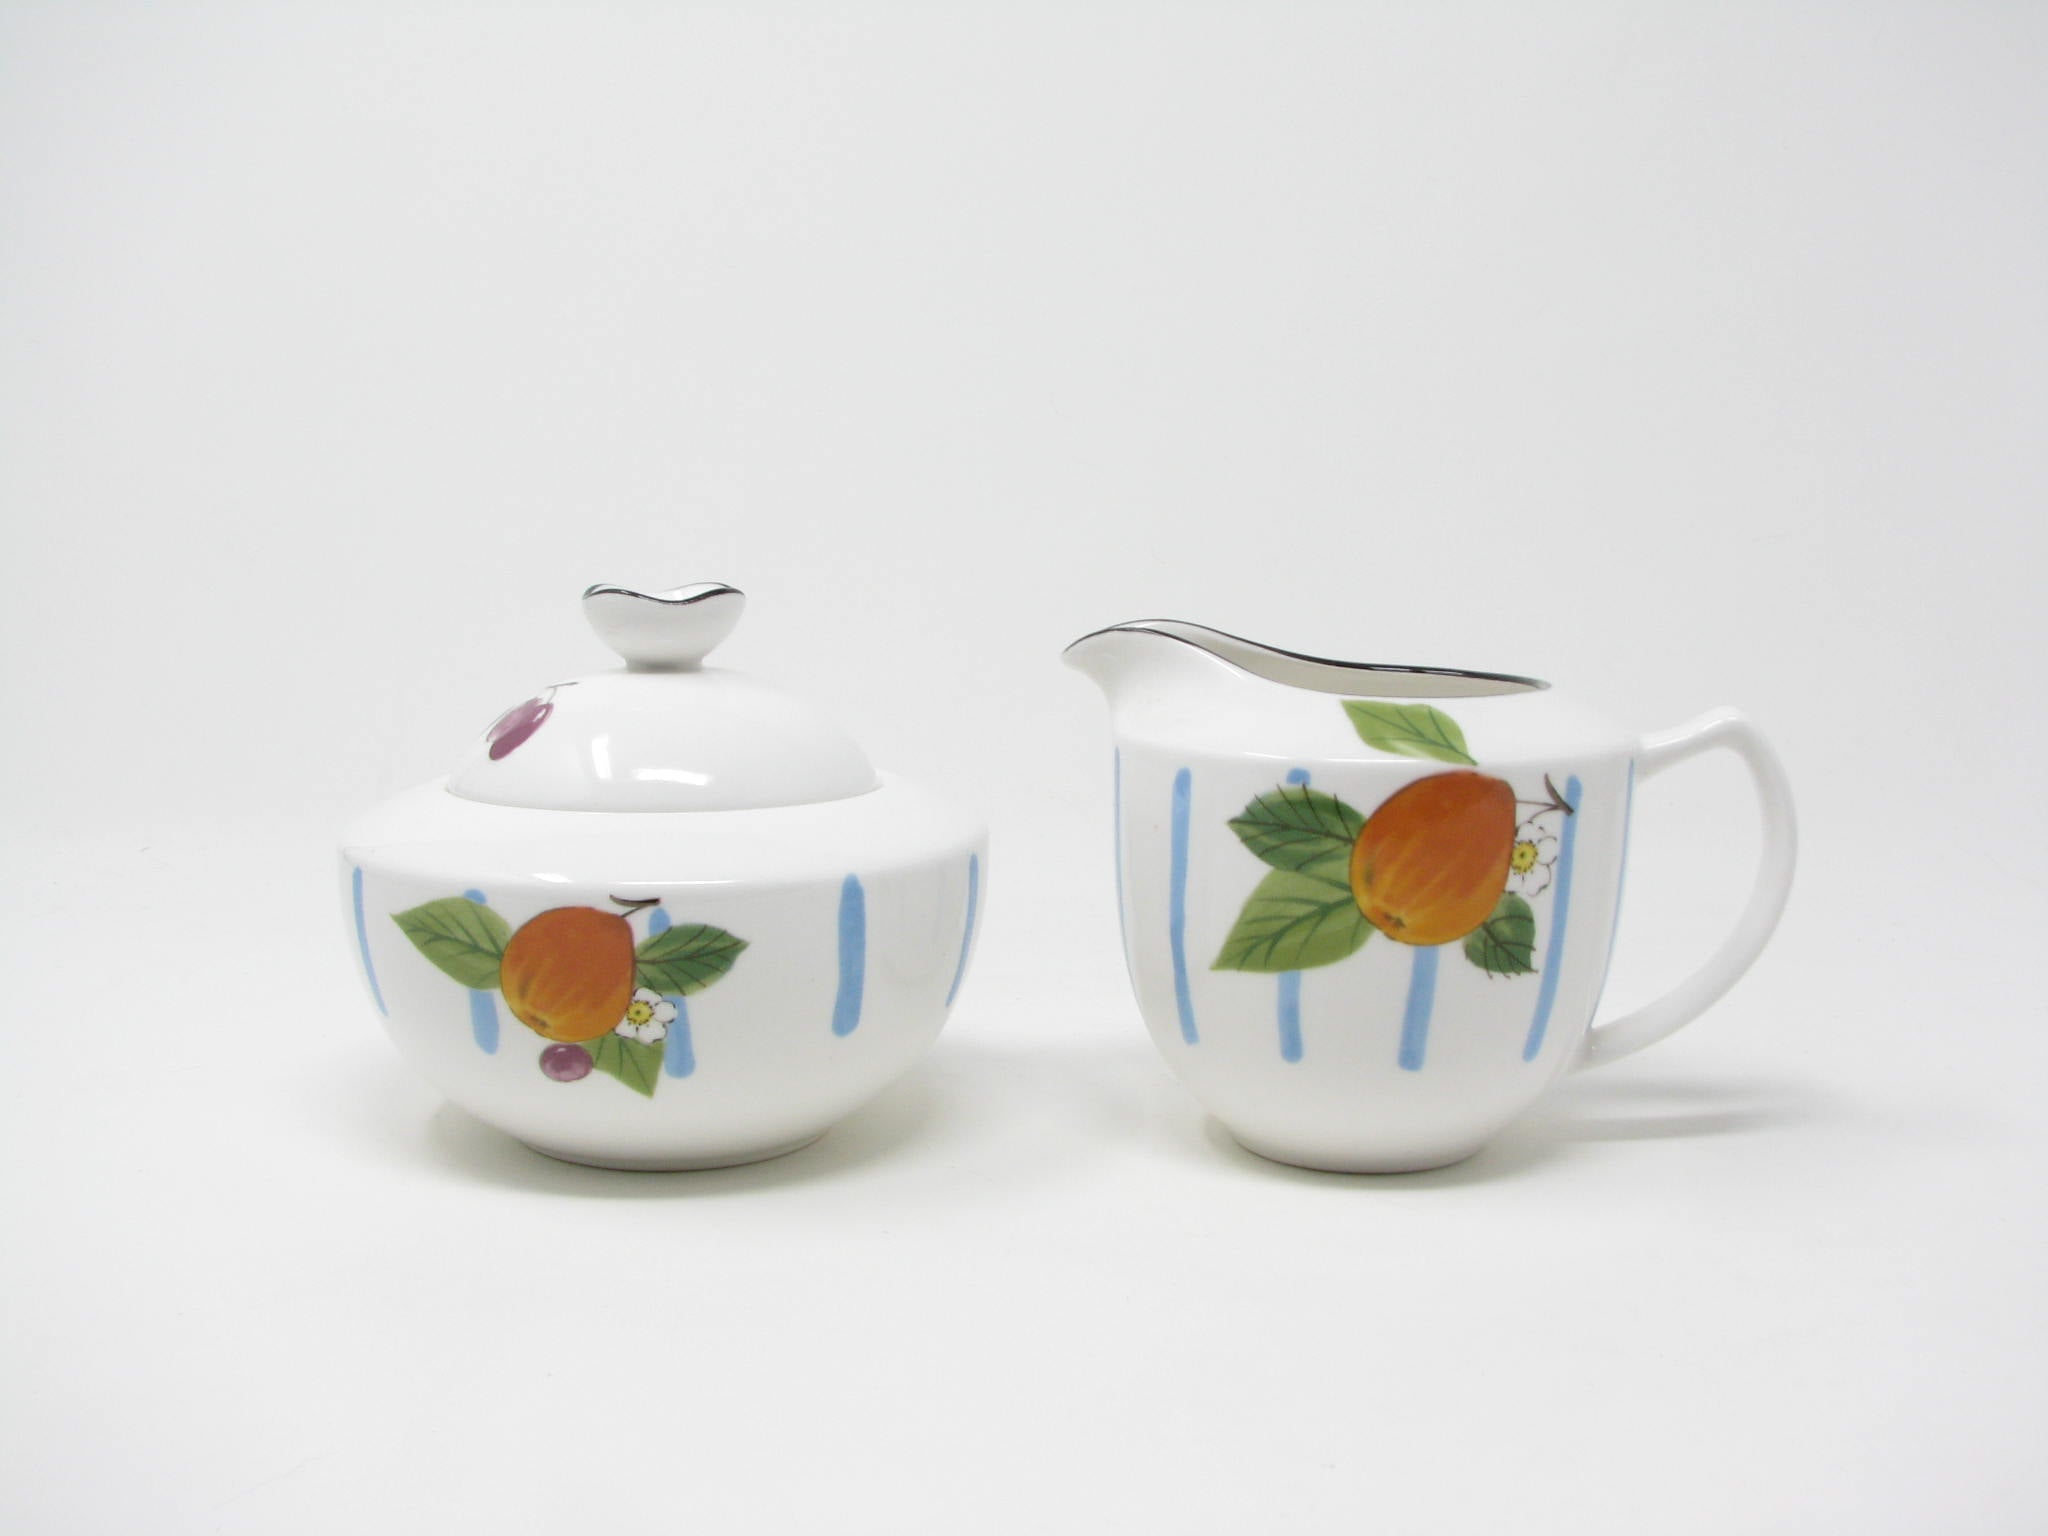 edgebrookhouse - Vintage Mikasa Sunshine Harvest Creamer and Sugar Bowl with Stripes and Fruit - 2 Pieces